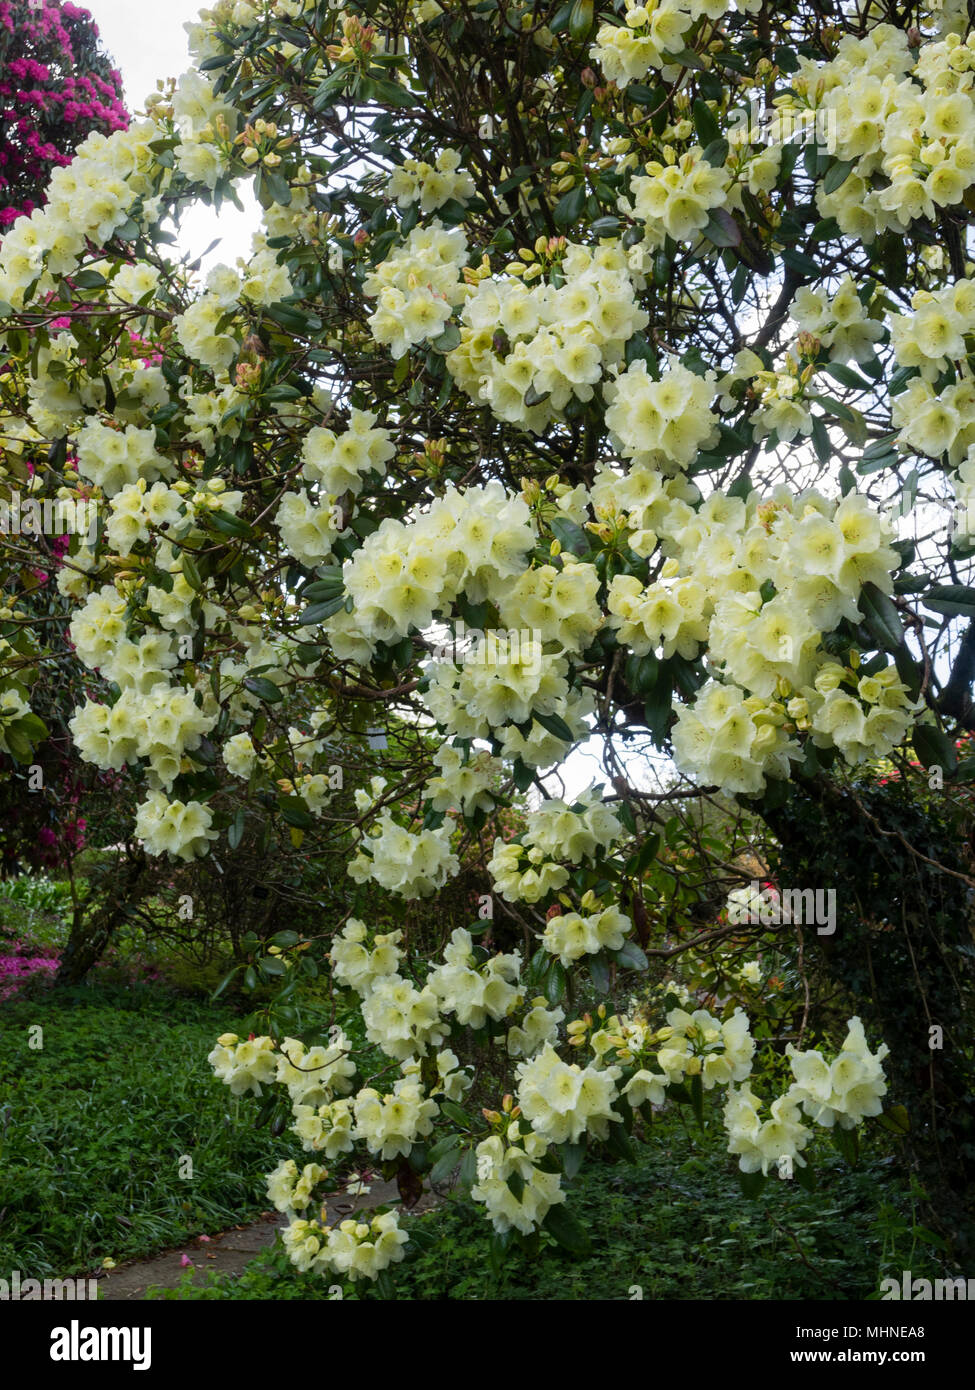 Massed cream flowers of the evergreen tree rhododendron, Rhododendron 'Katherine Fortescue' Stock Photo